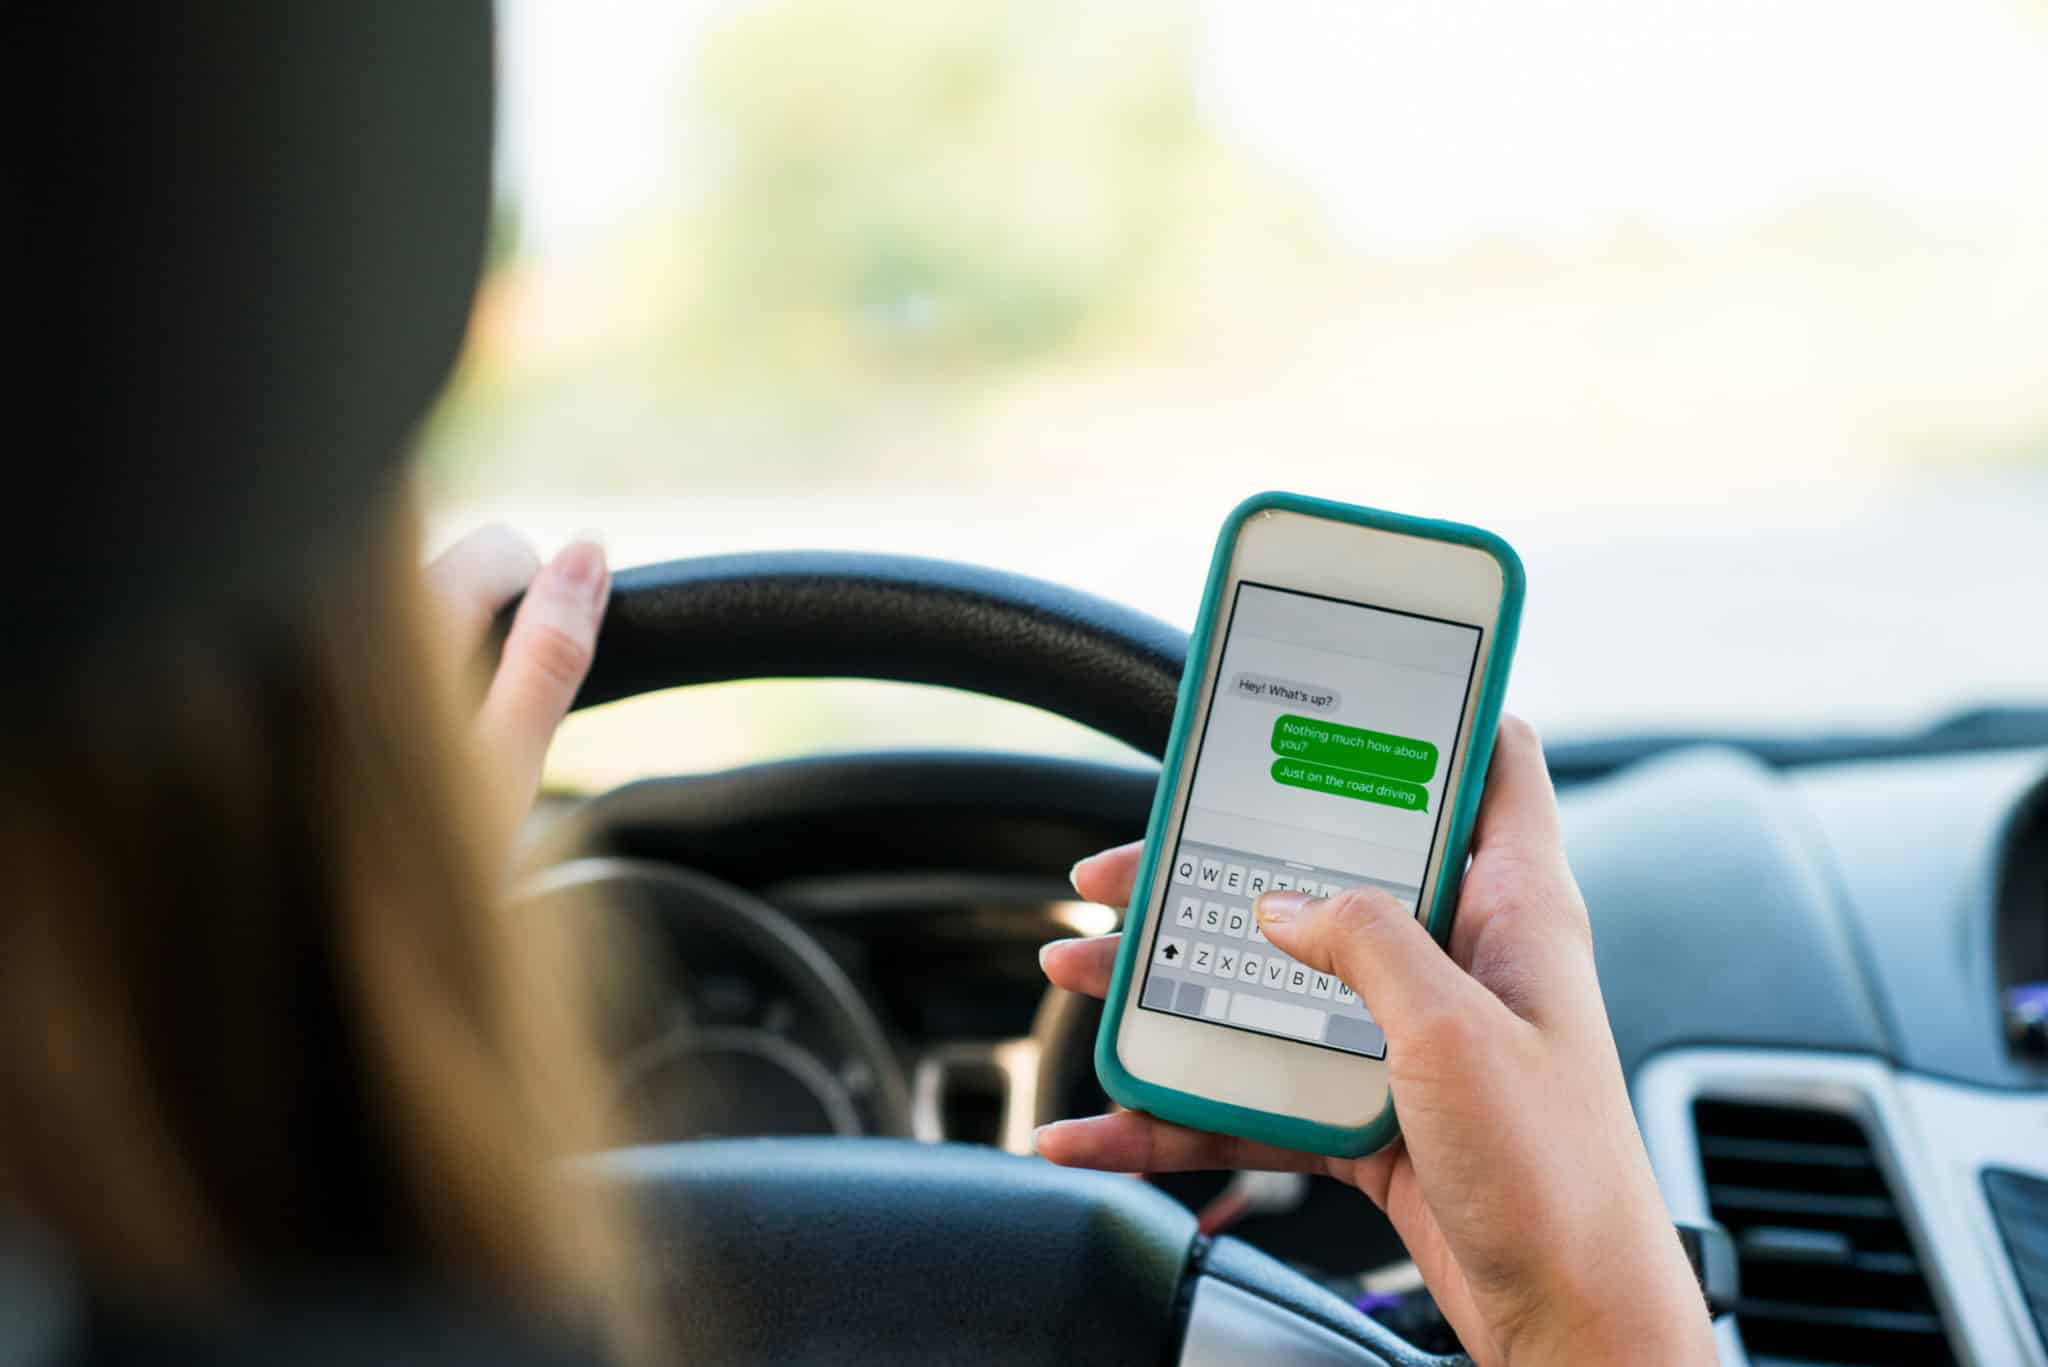 Distracted Driving – Don’t Let It Happen to You